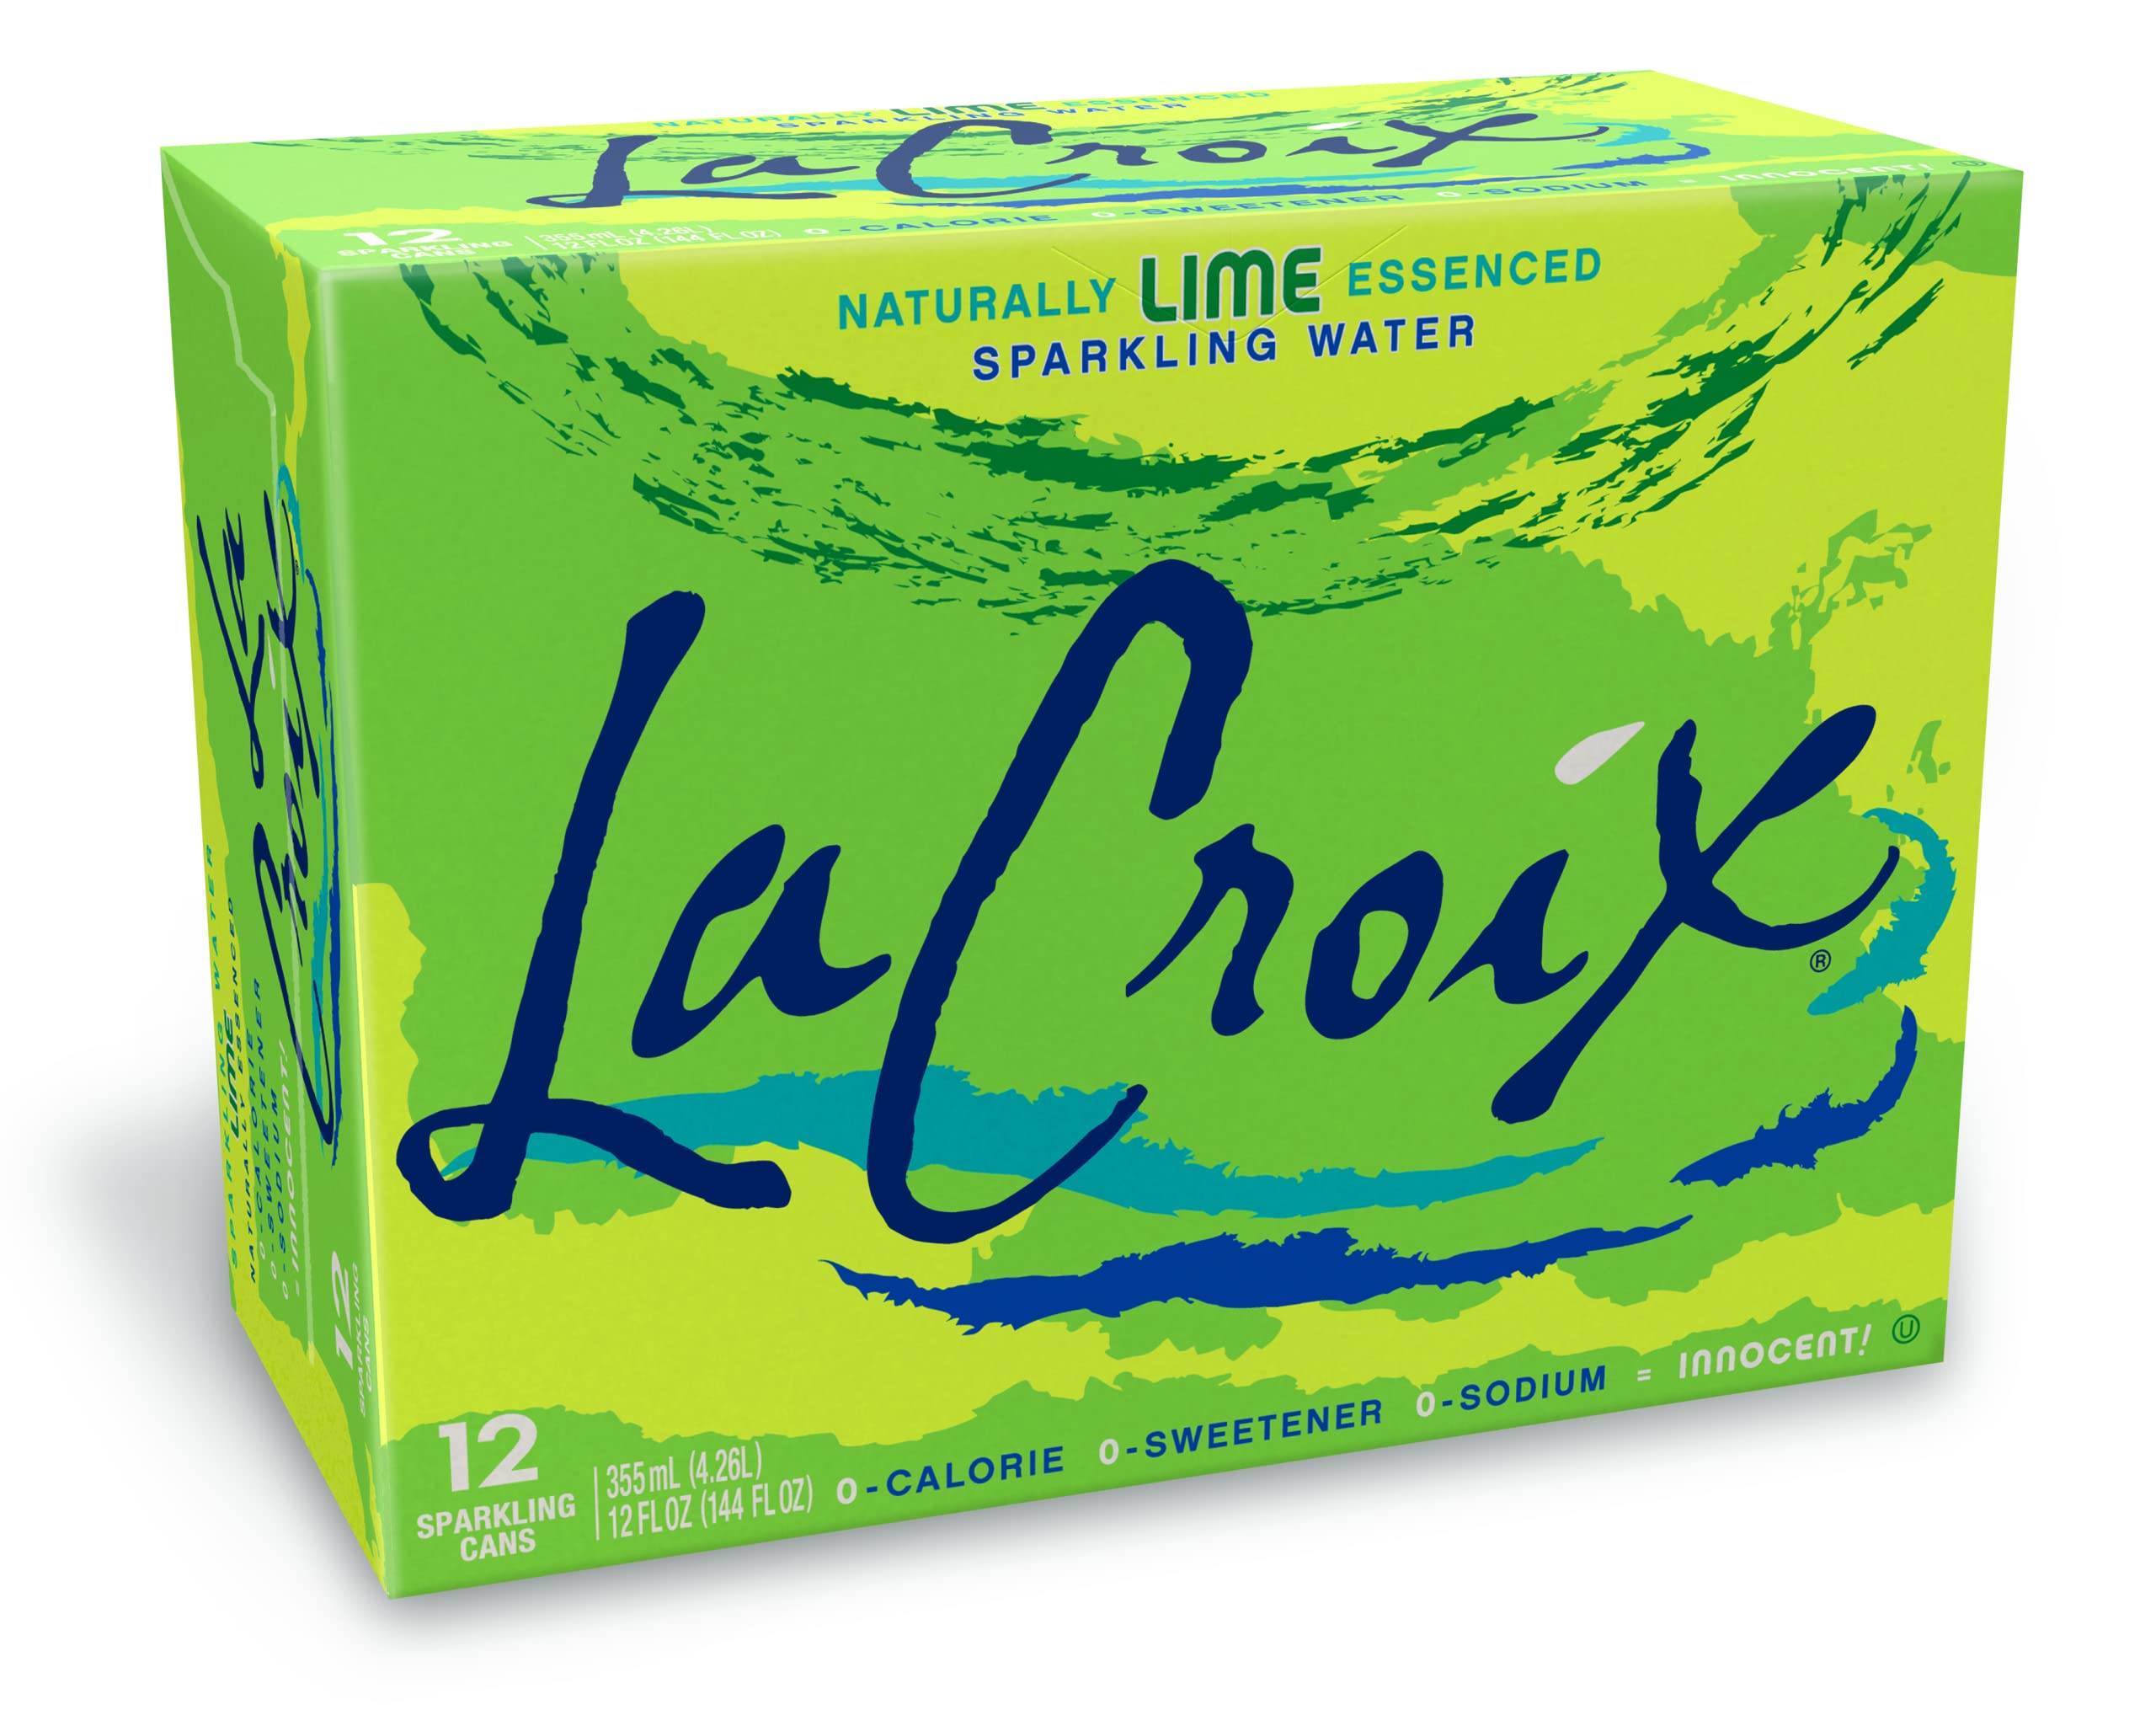 12-Pack 12-Oz LaCroix Sparkling Water (Lime) $3.60 + Free Shipping w/ Prime or on $35+